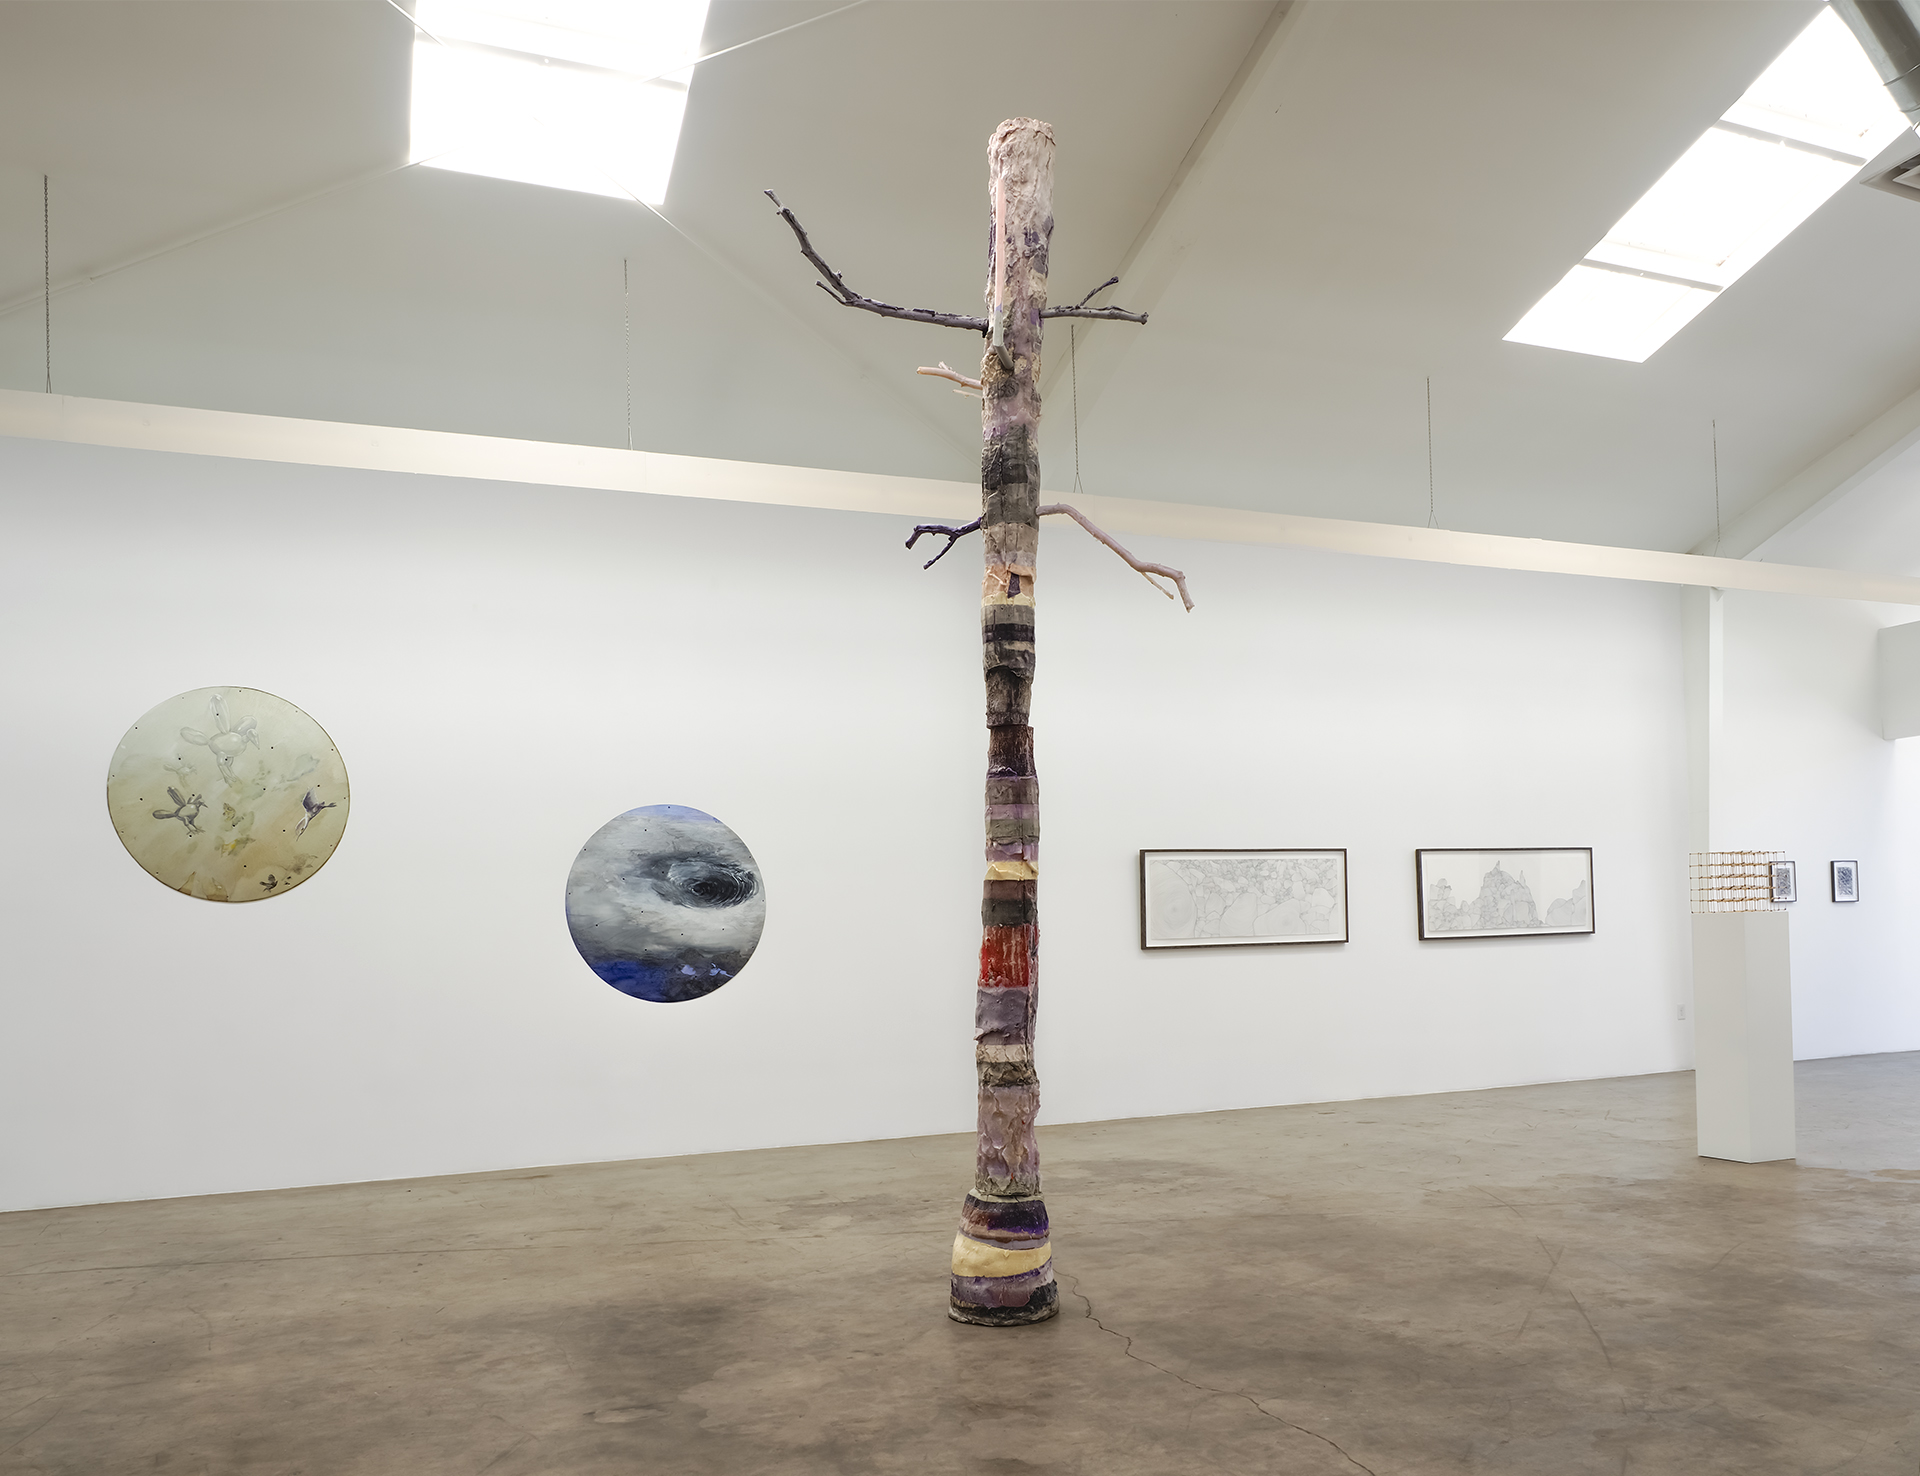 Left to right: Marielou van Lierop (two disks), Irene de Boer (large sculpture), China Adams (two framed drawings), Tim Hawkinson (small sculpture), Saminte Ekeland (small works in the background)